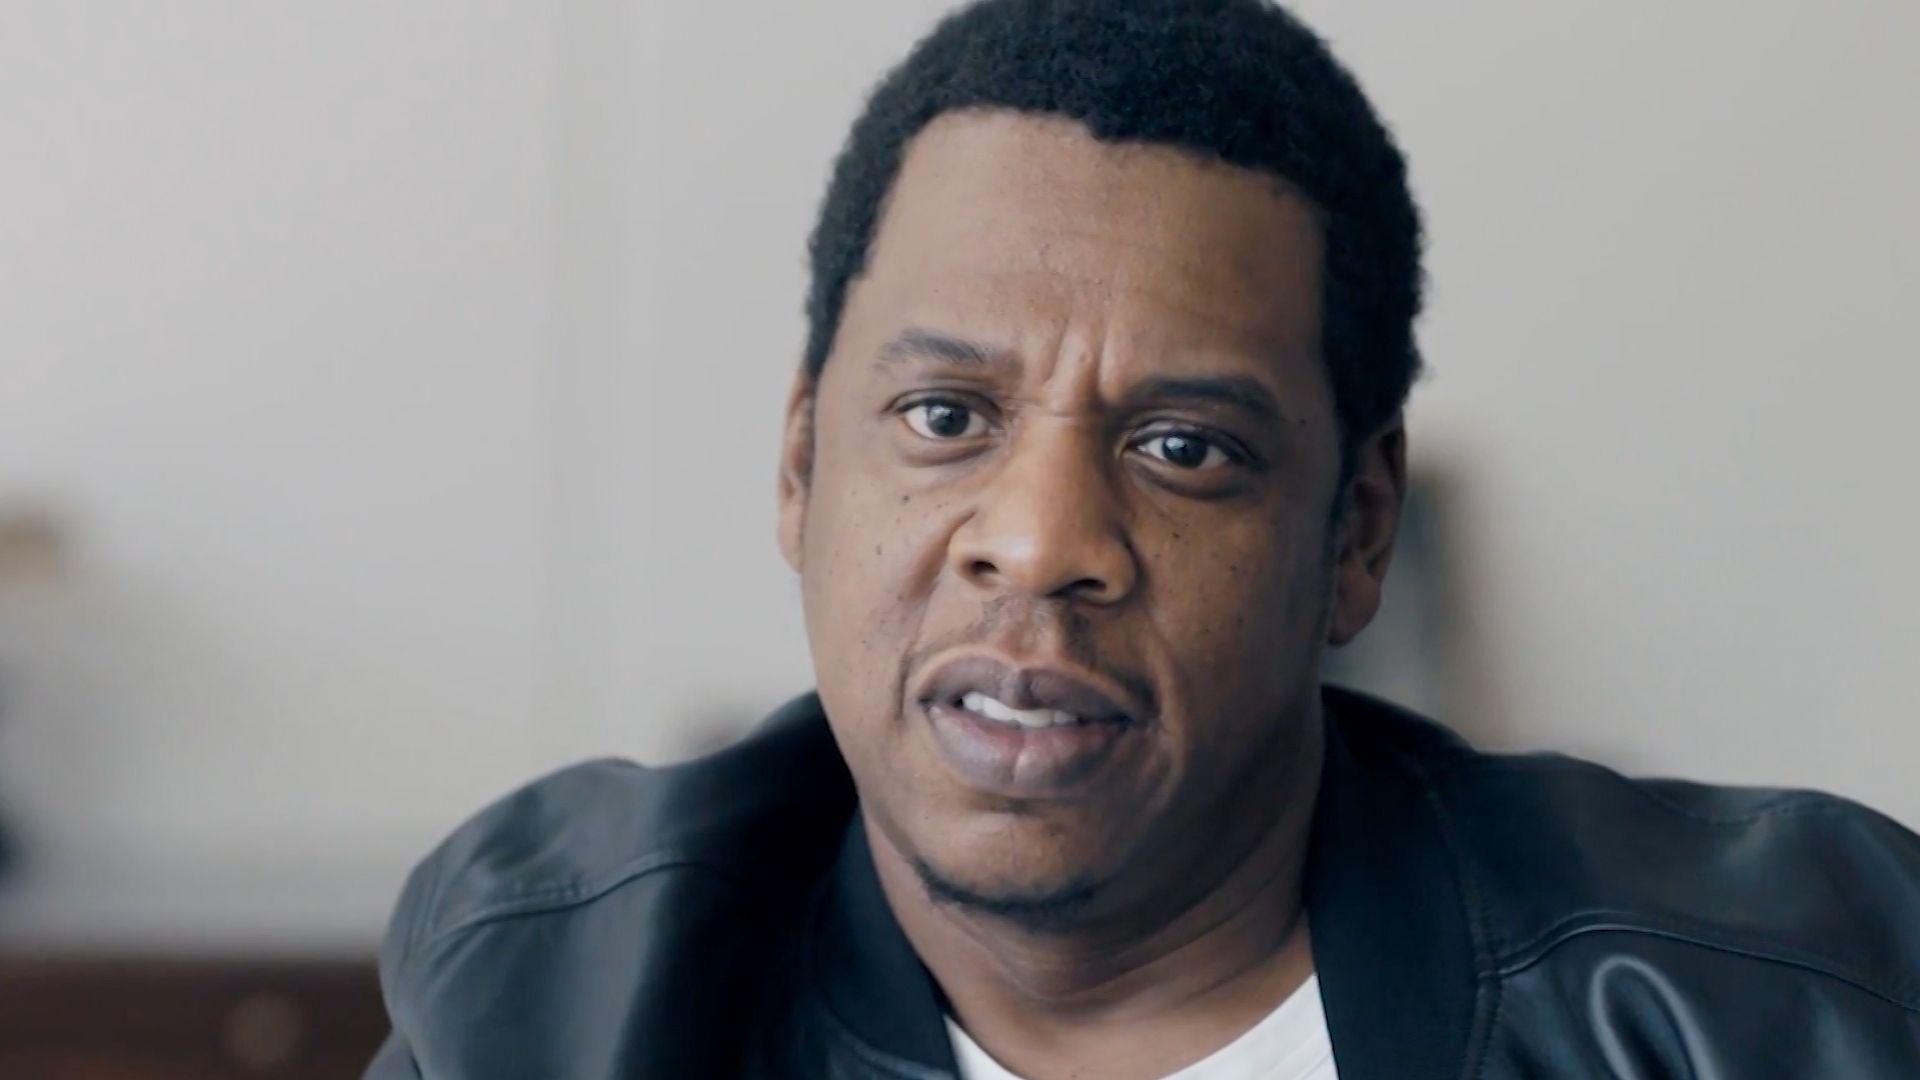 Jay Z Opens Up About Cheating On Beyoncé